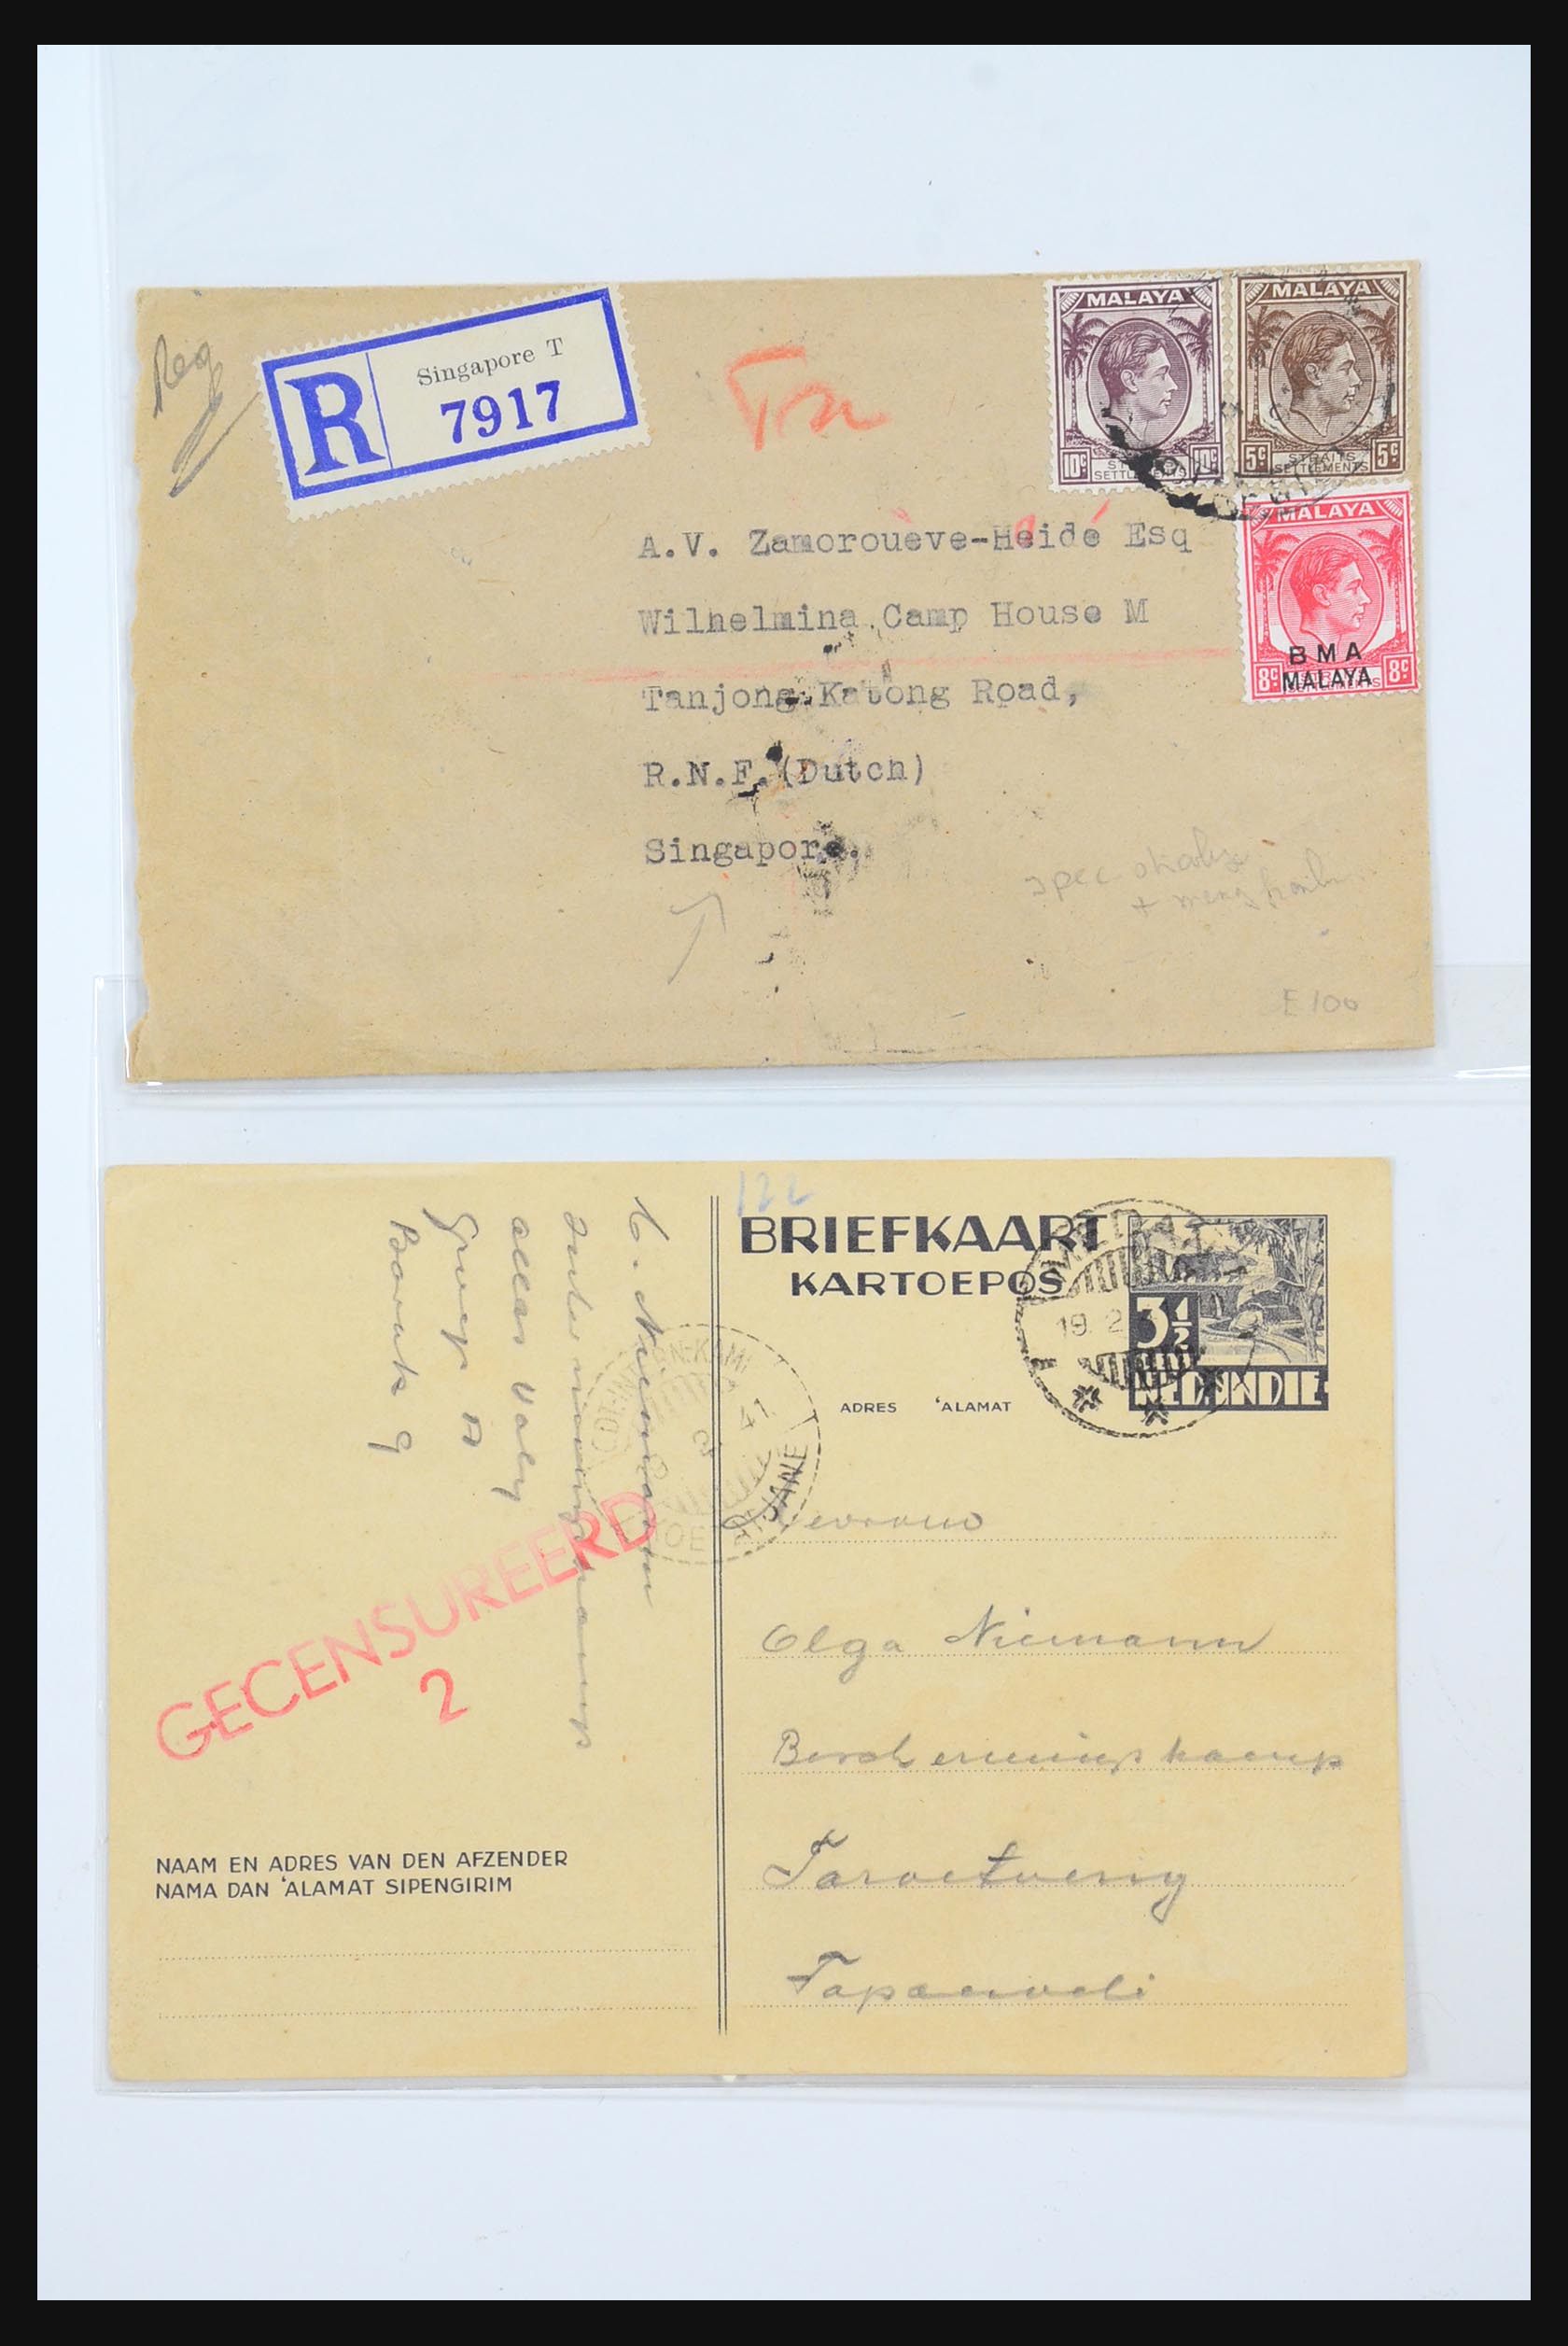 31362 103 - 31362 Netherlands Indies Japanese occupation covers 1942-1945.